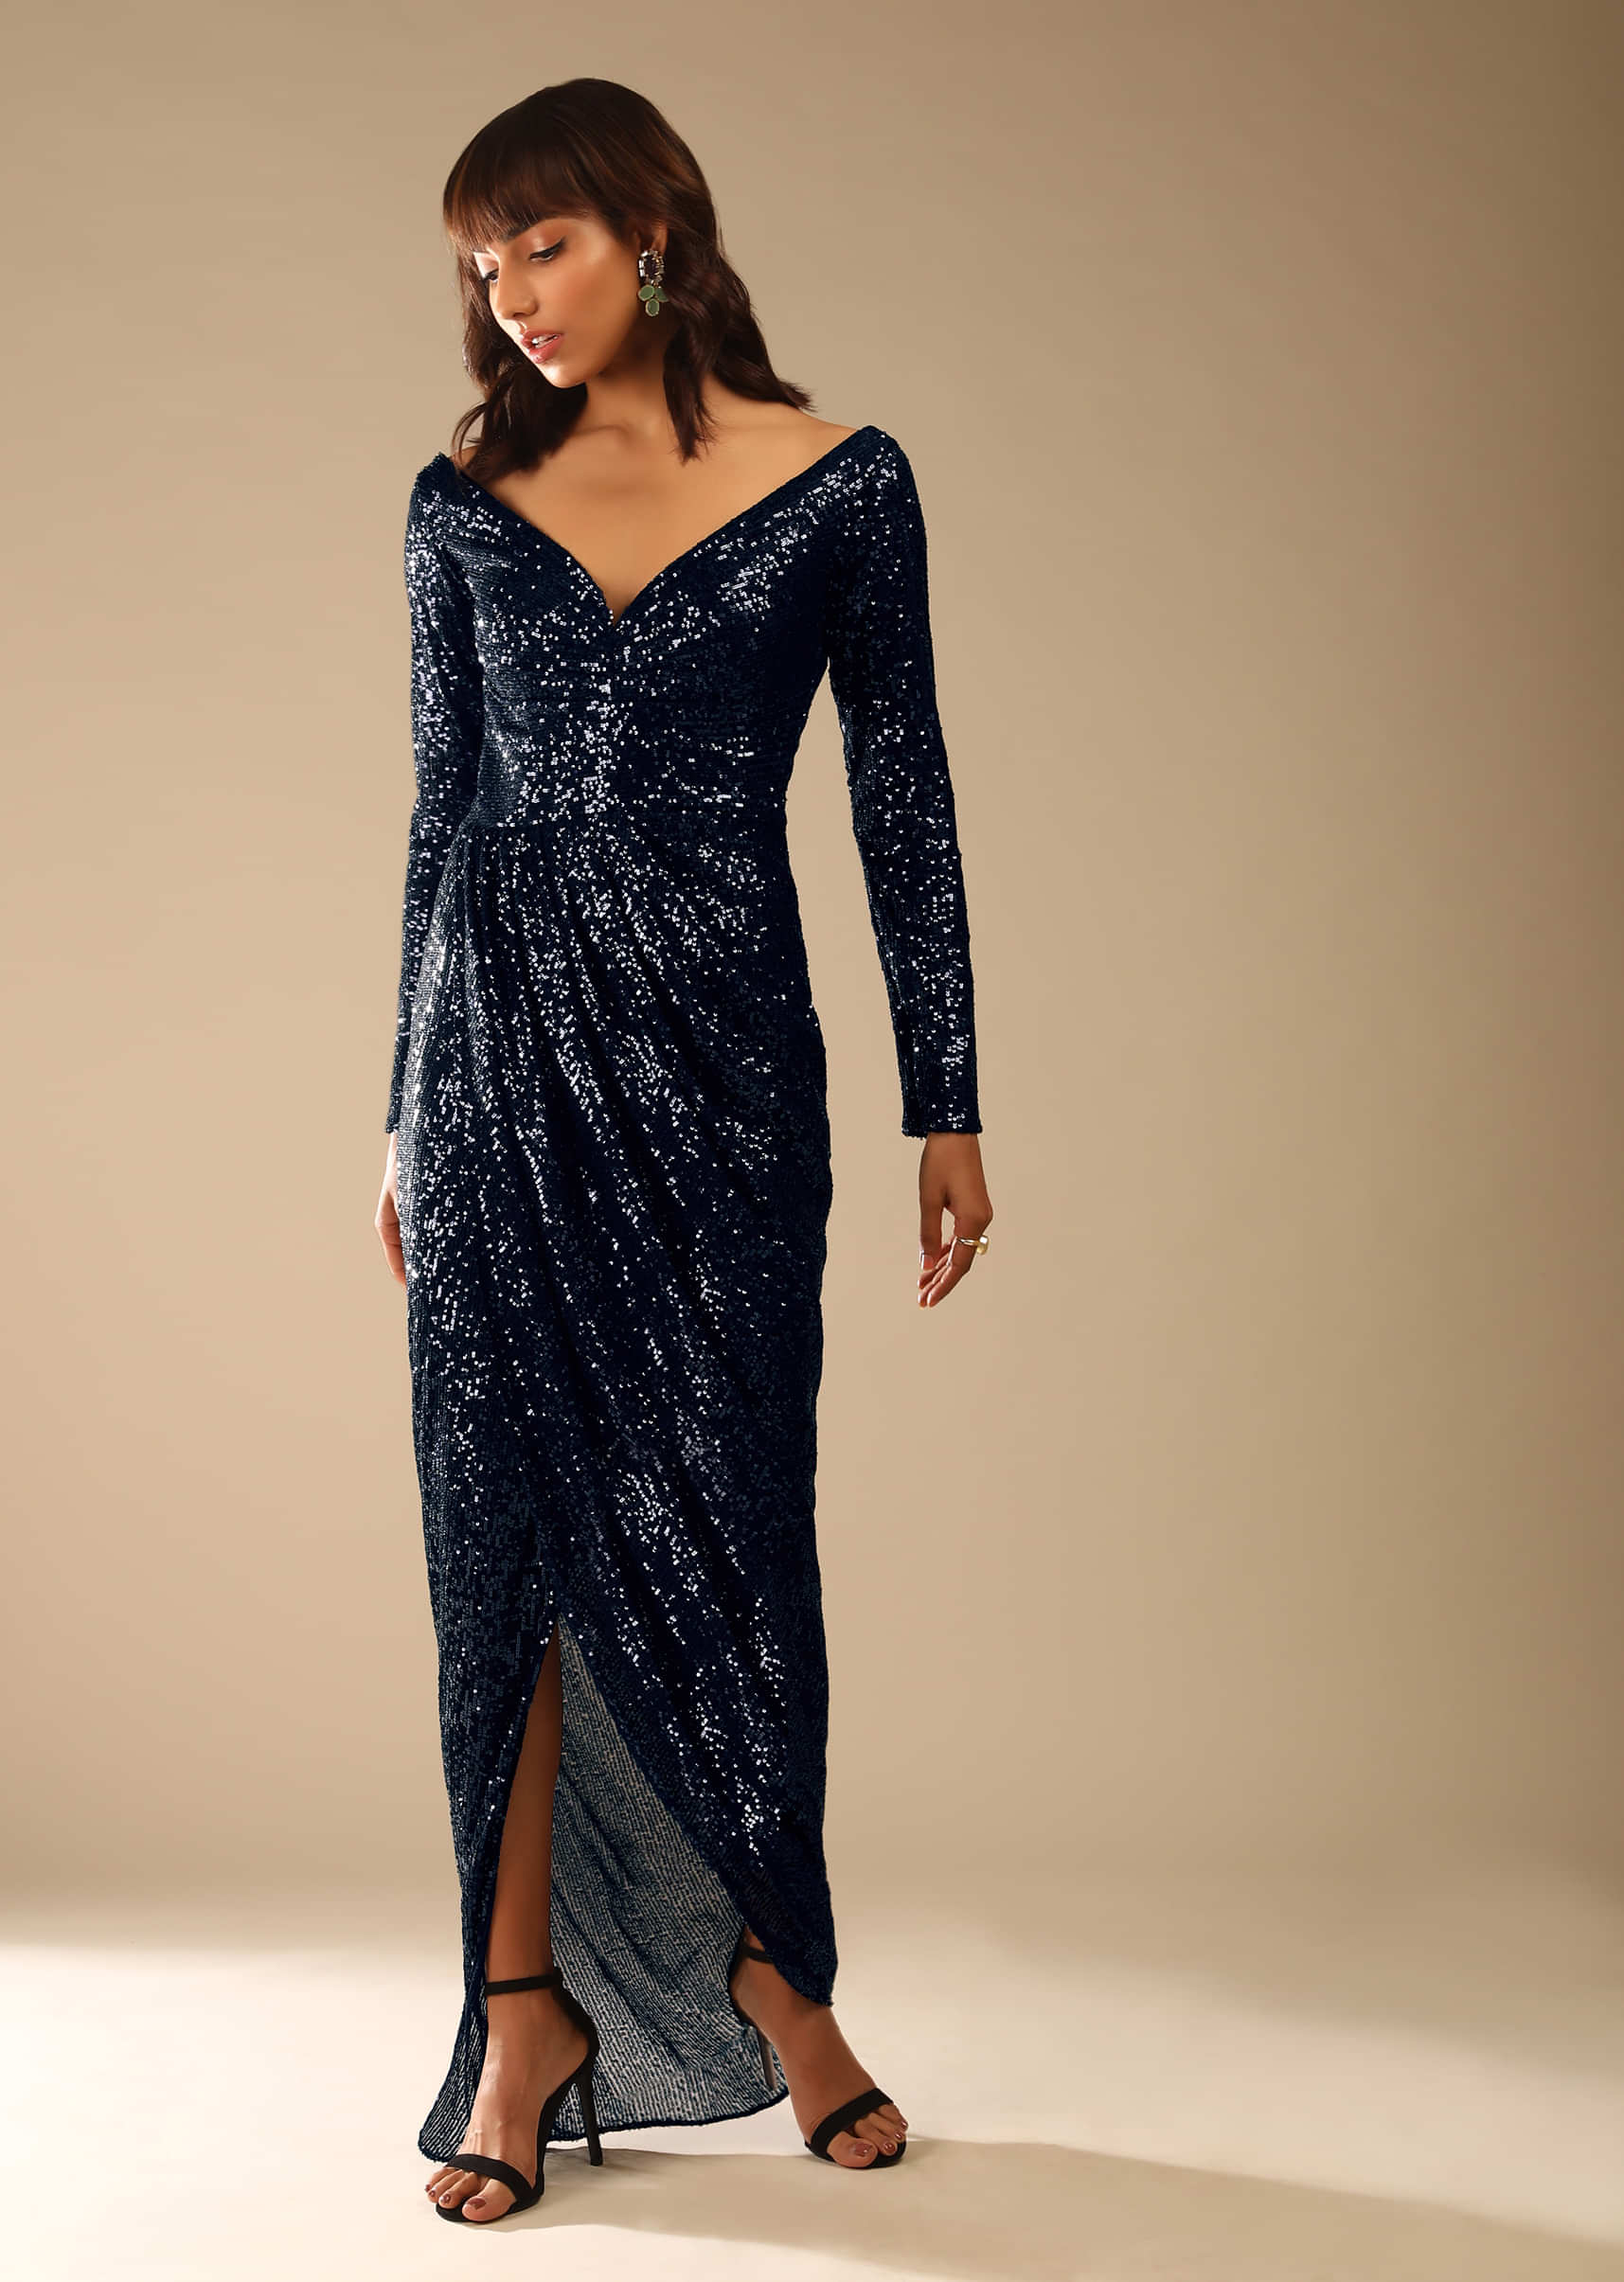 Navy Blue Gown Embellished In Sequins With Plunging Neckline And Cowl Draped Overlapping Slit